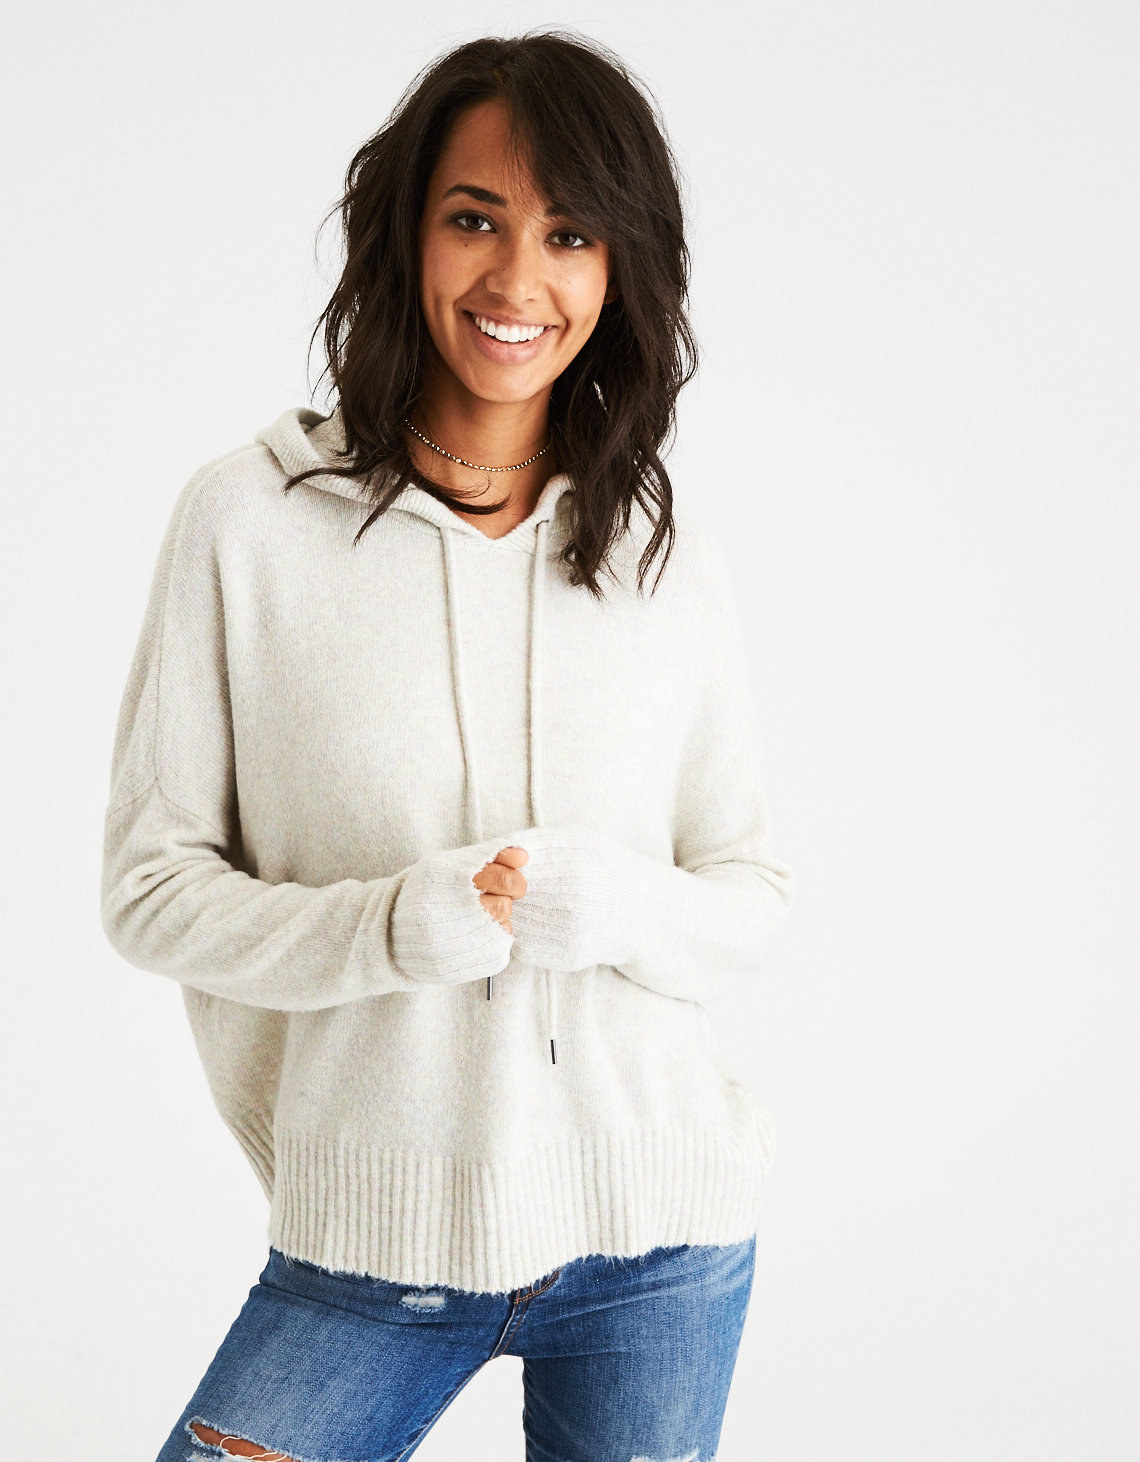 41 Cozy Sweaters You'll Basically Want To Live In